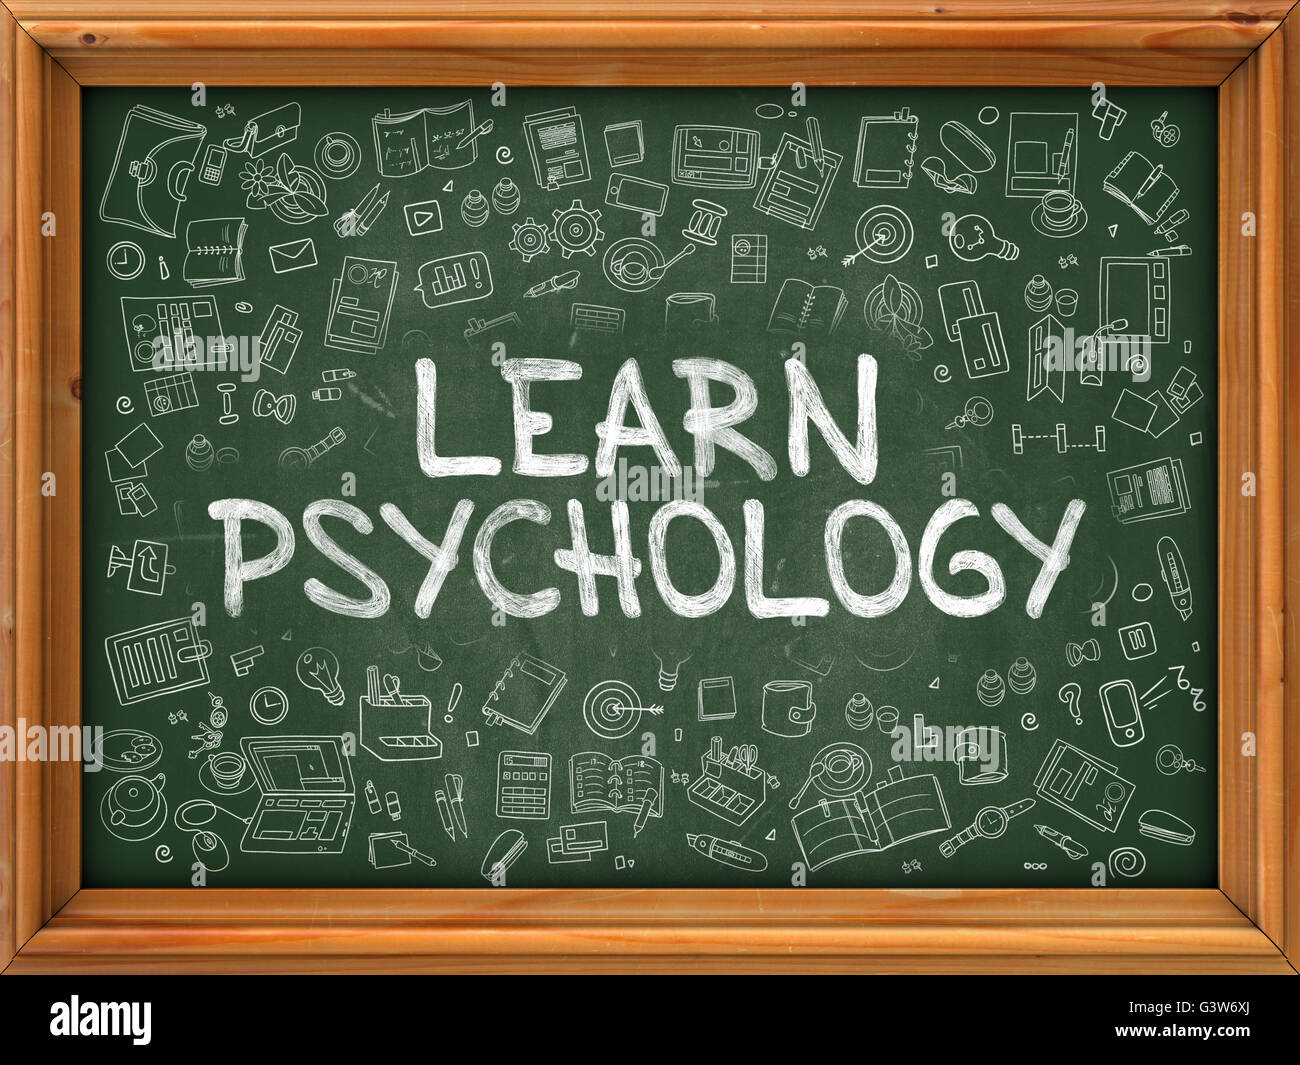 Green Chalkboard with Hand Drawn Learn Psychology. Stock Photo